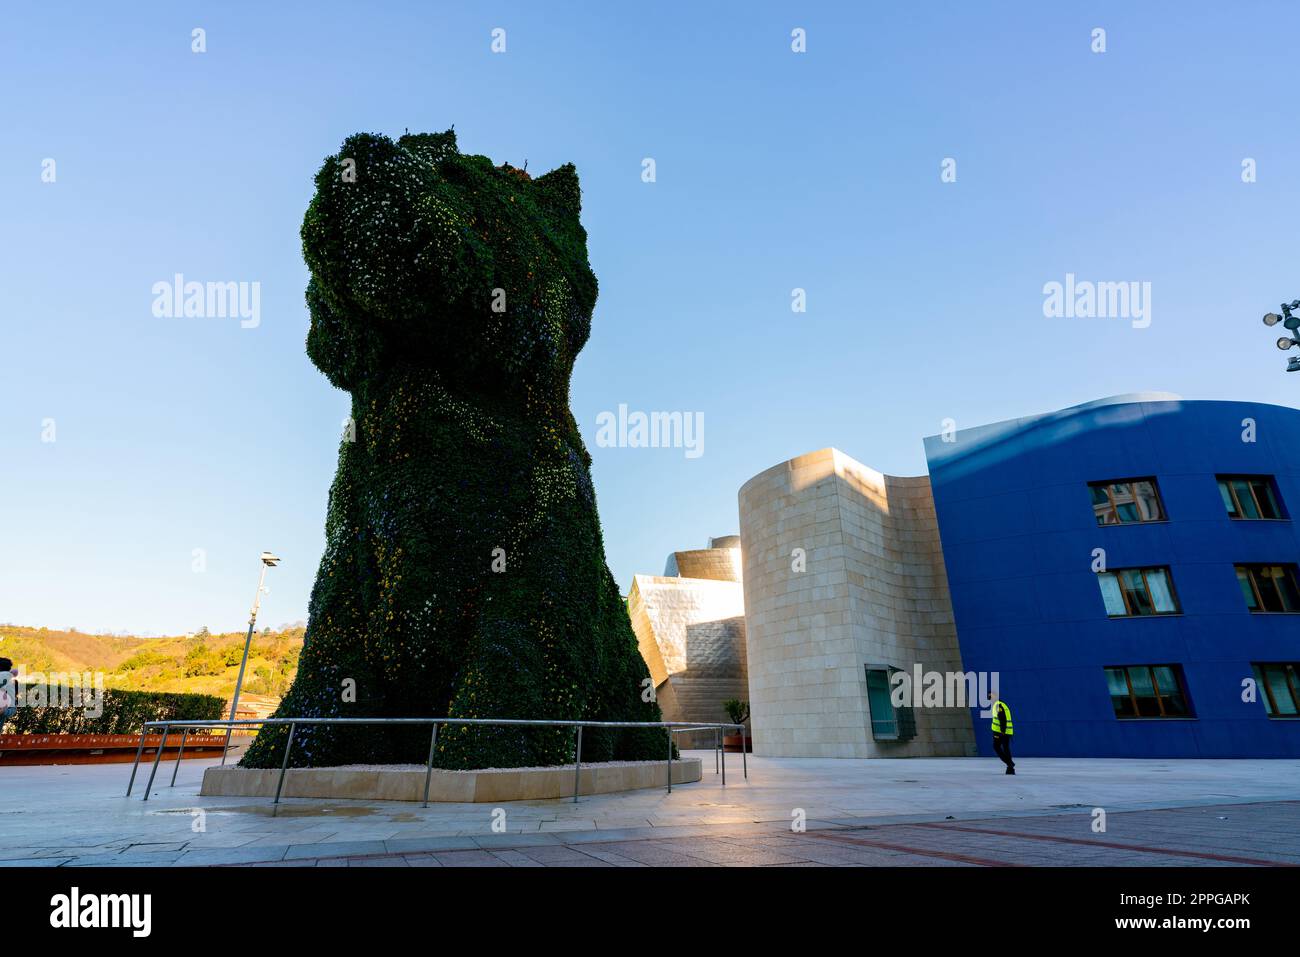 BILBAO, SPAIN-DECEMBER 18, 2021 : Puppy stands guard at Guggenheim Museum in Bilbao, Biscay, Basque Country, Spain. Landmarks. Dog sculpture of artist Jeff Koons. The Worldâ€™s largest flower sculpture. Stock Photo